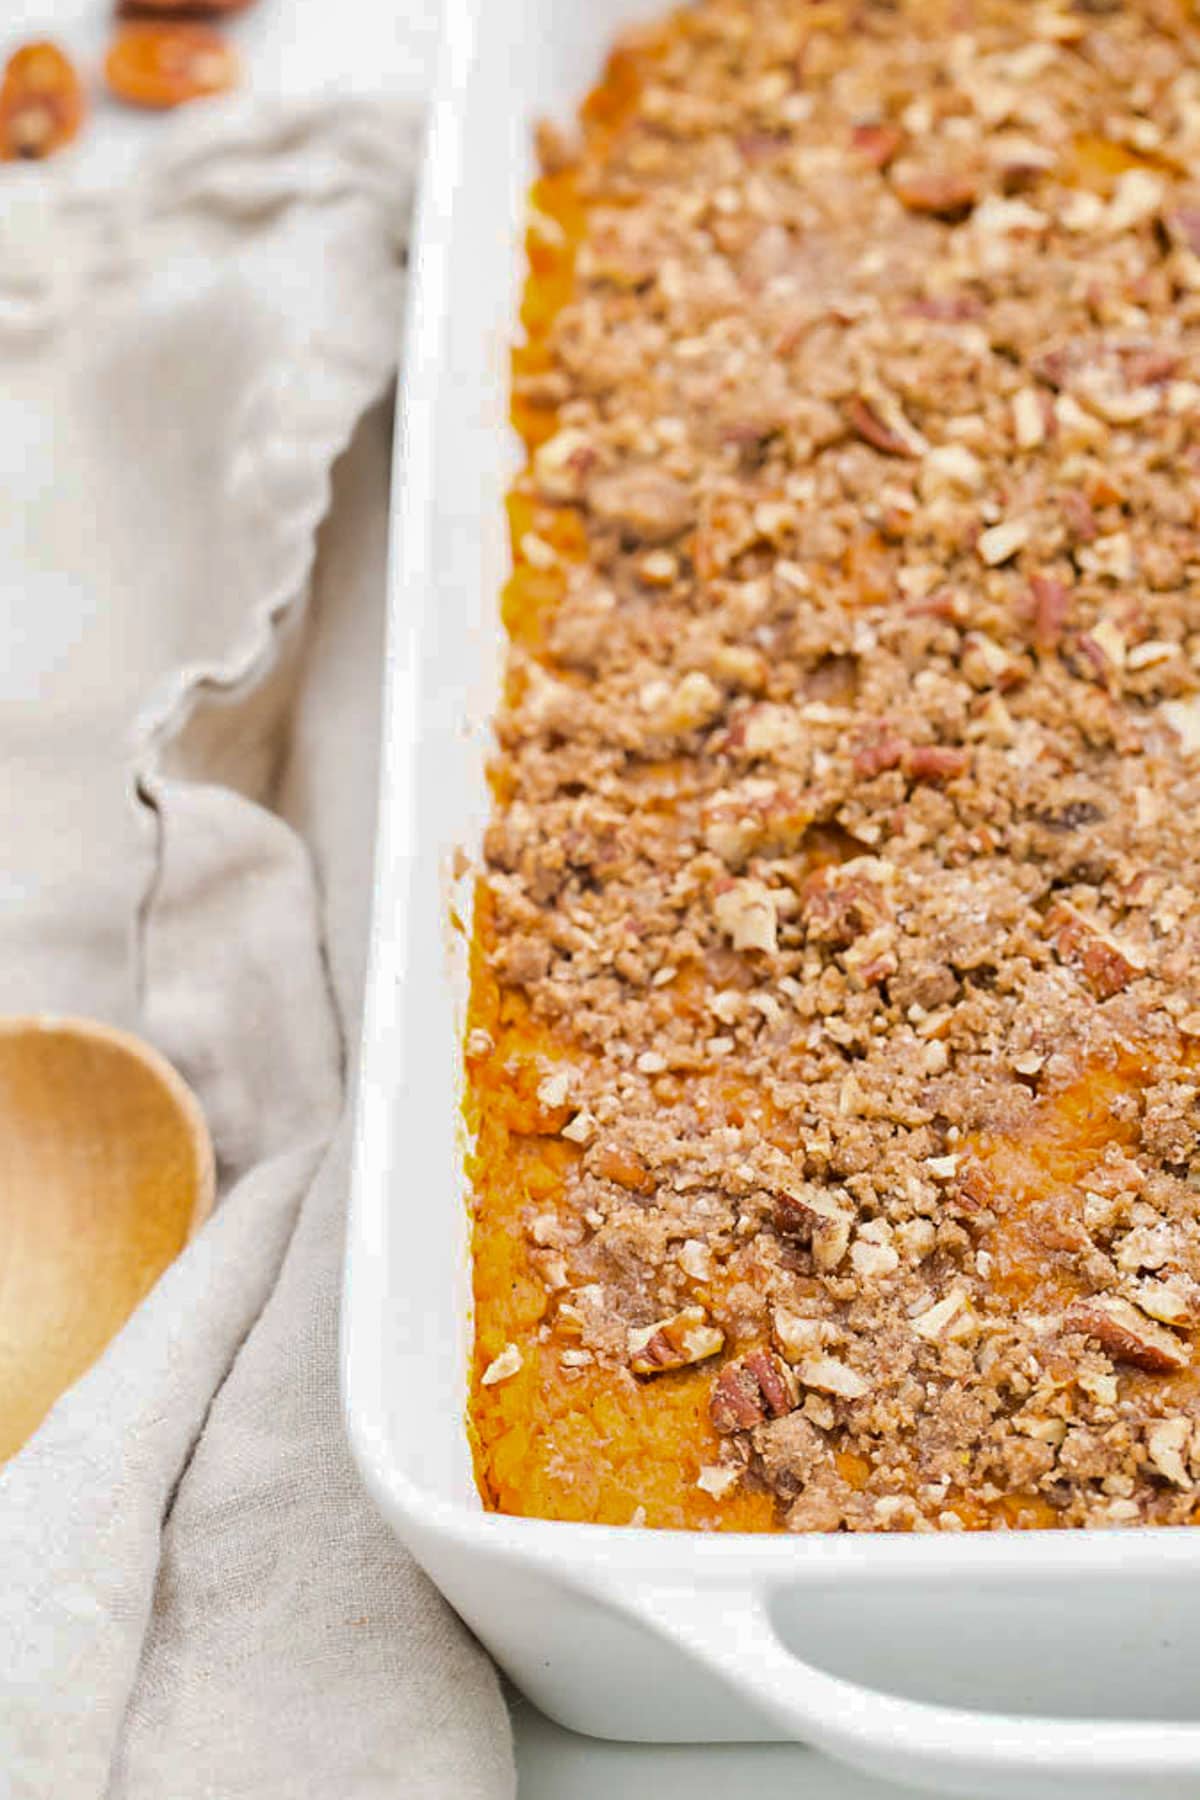 A large white rectangular casserole dish holding sweet potato casserole topped with pecans.